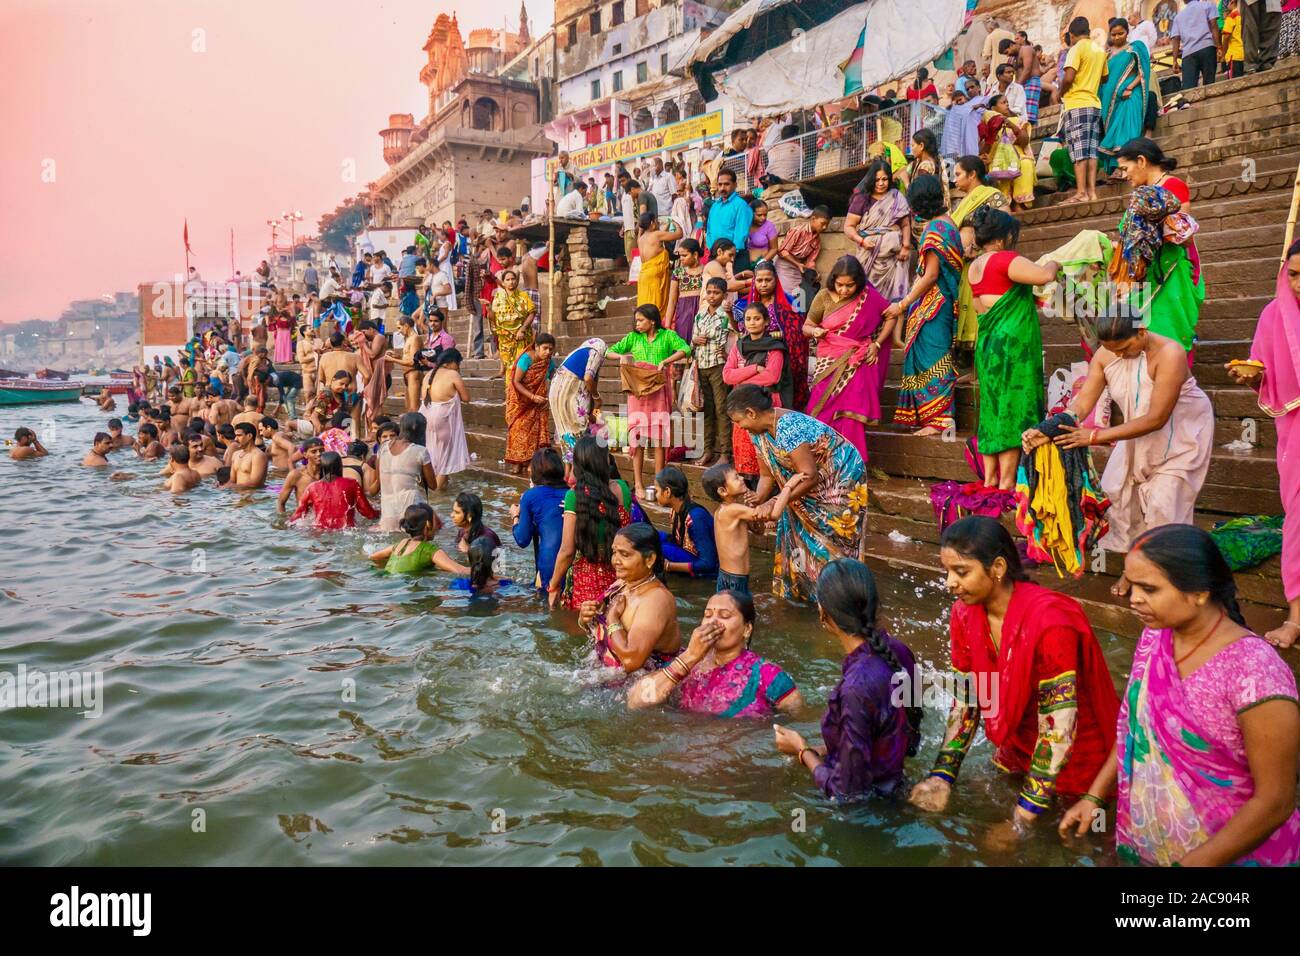 Colorful traditional clothing and Hindu religious ritual of bathing in the Ganges River from the ancient ghats of Varanasi. Stock Photo